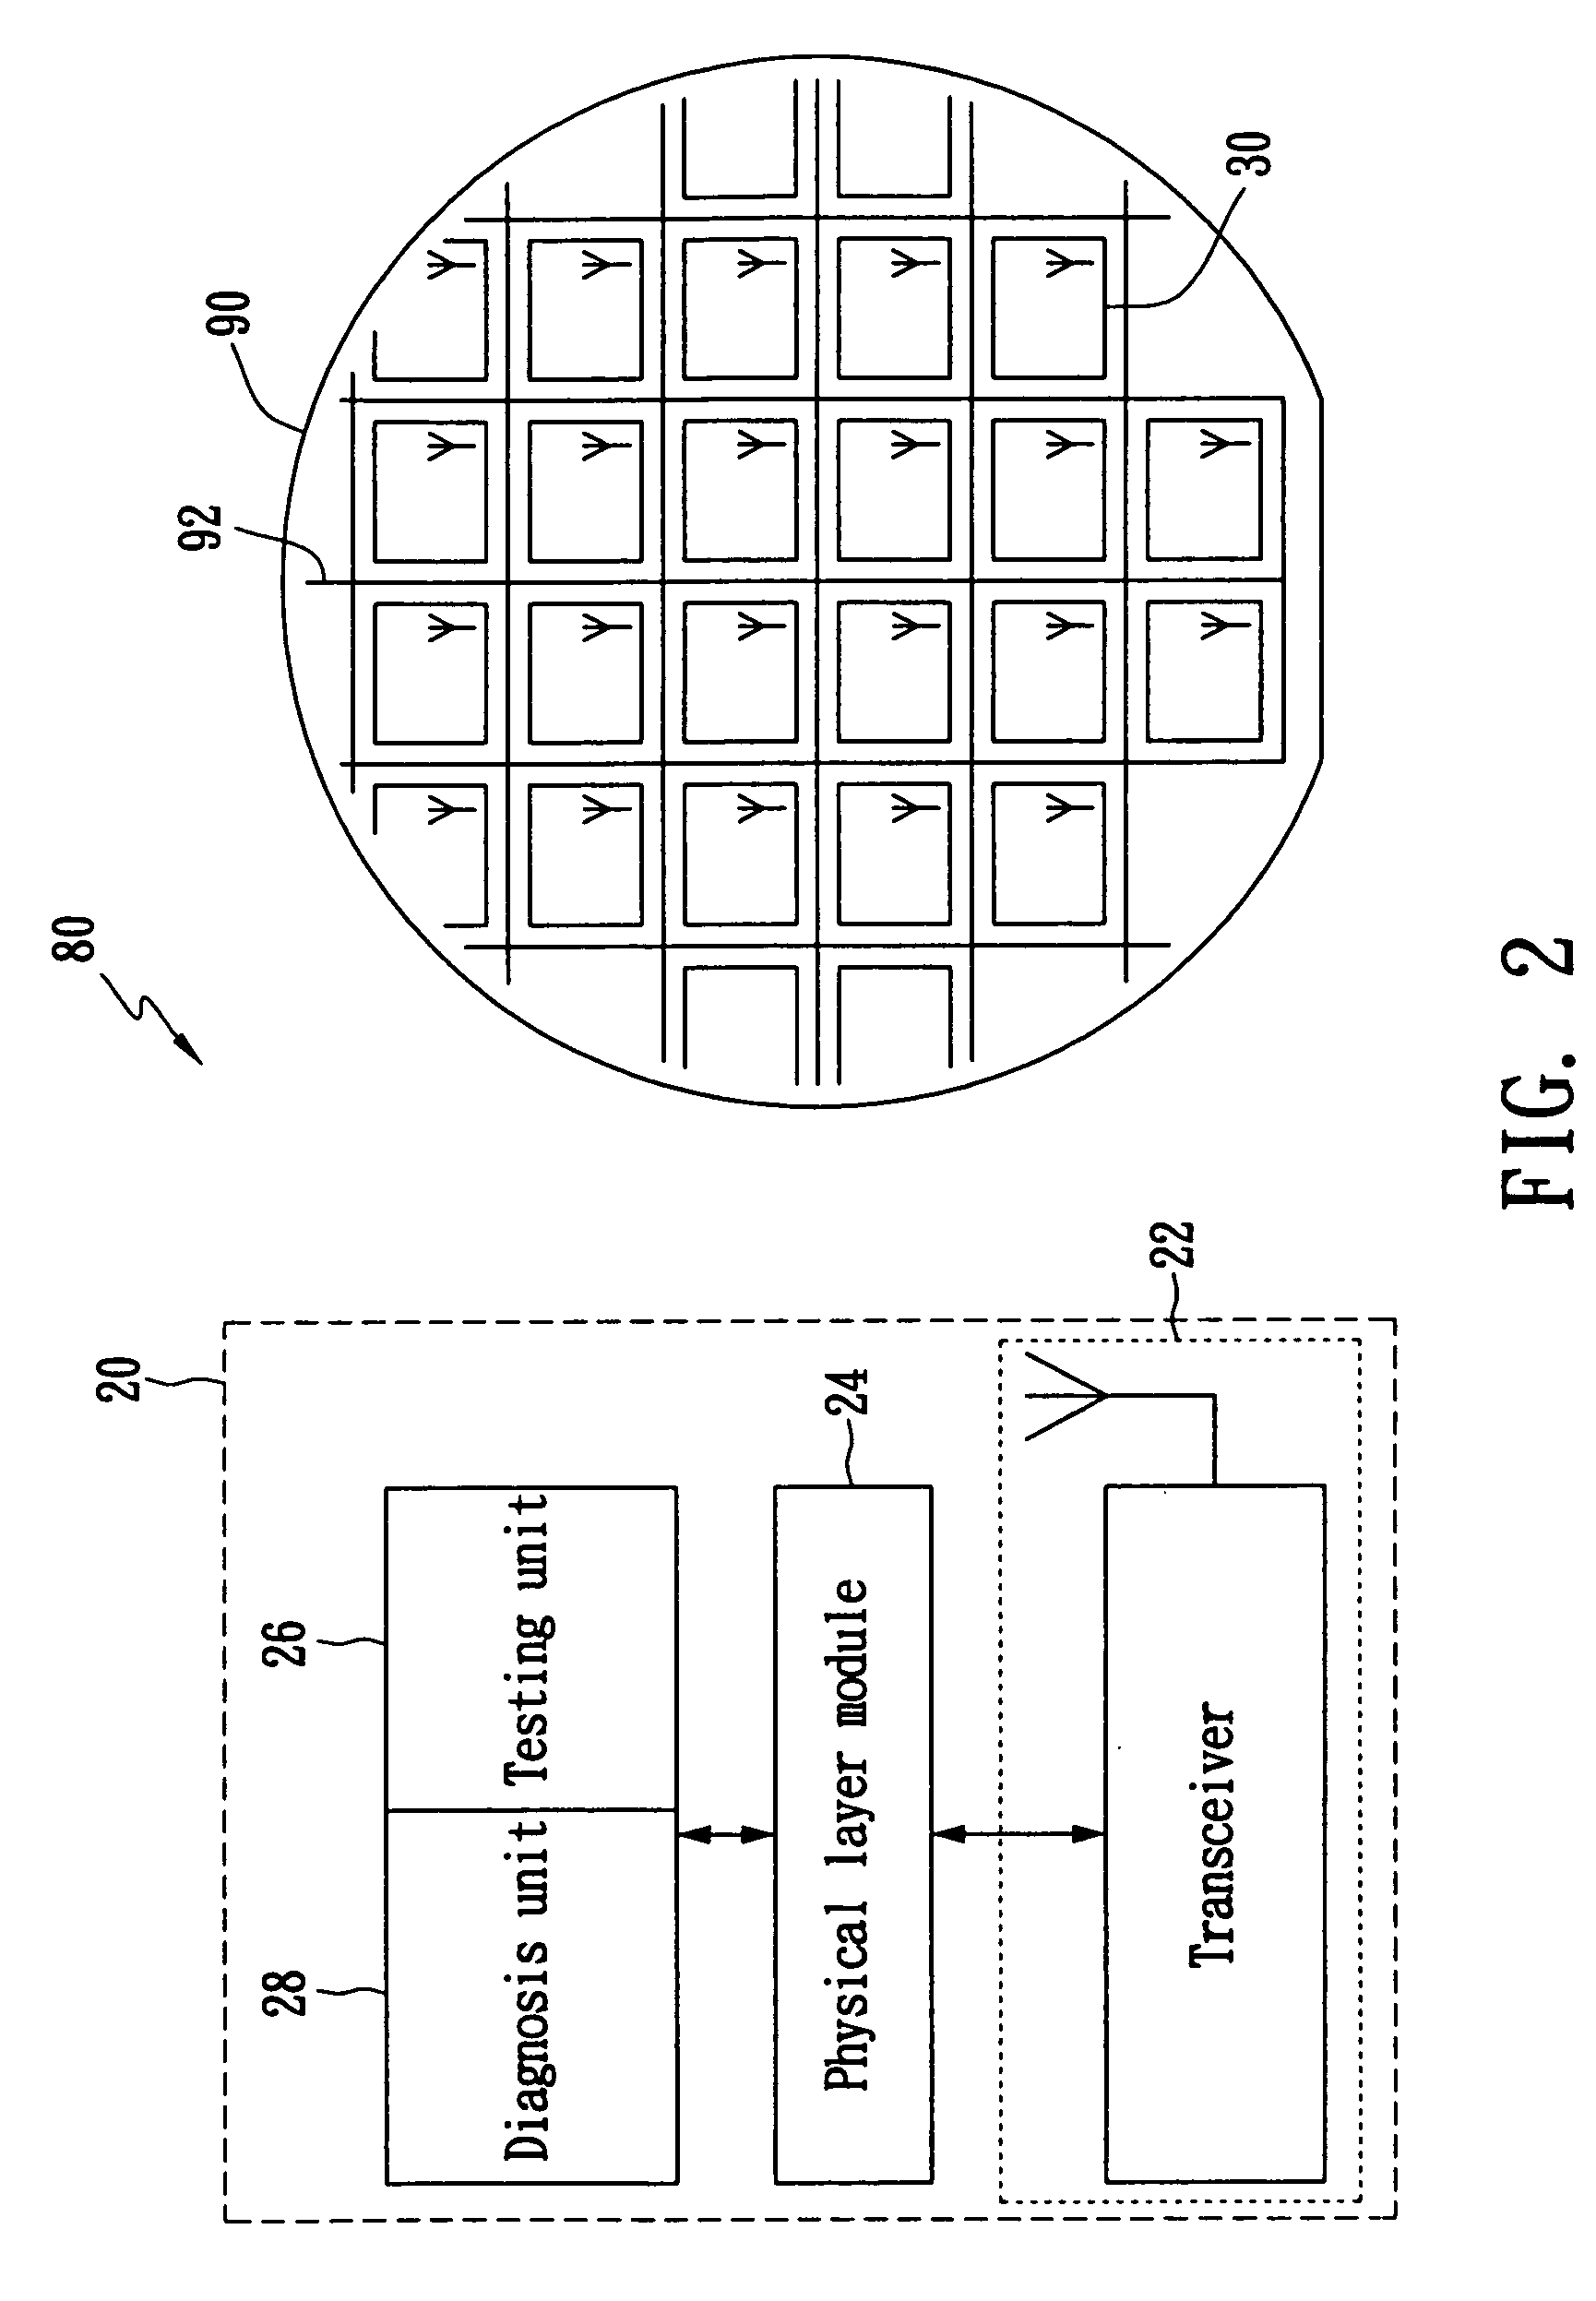 Probing system for integrated circuit devices